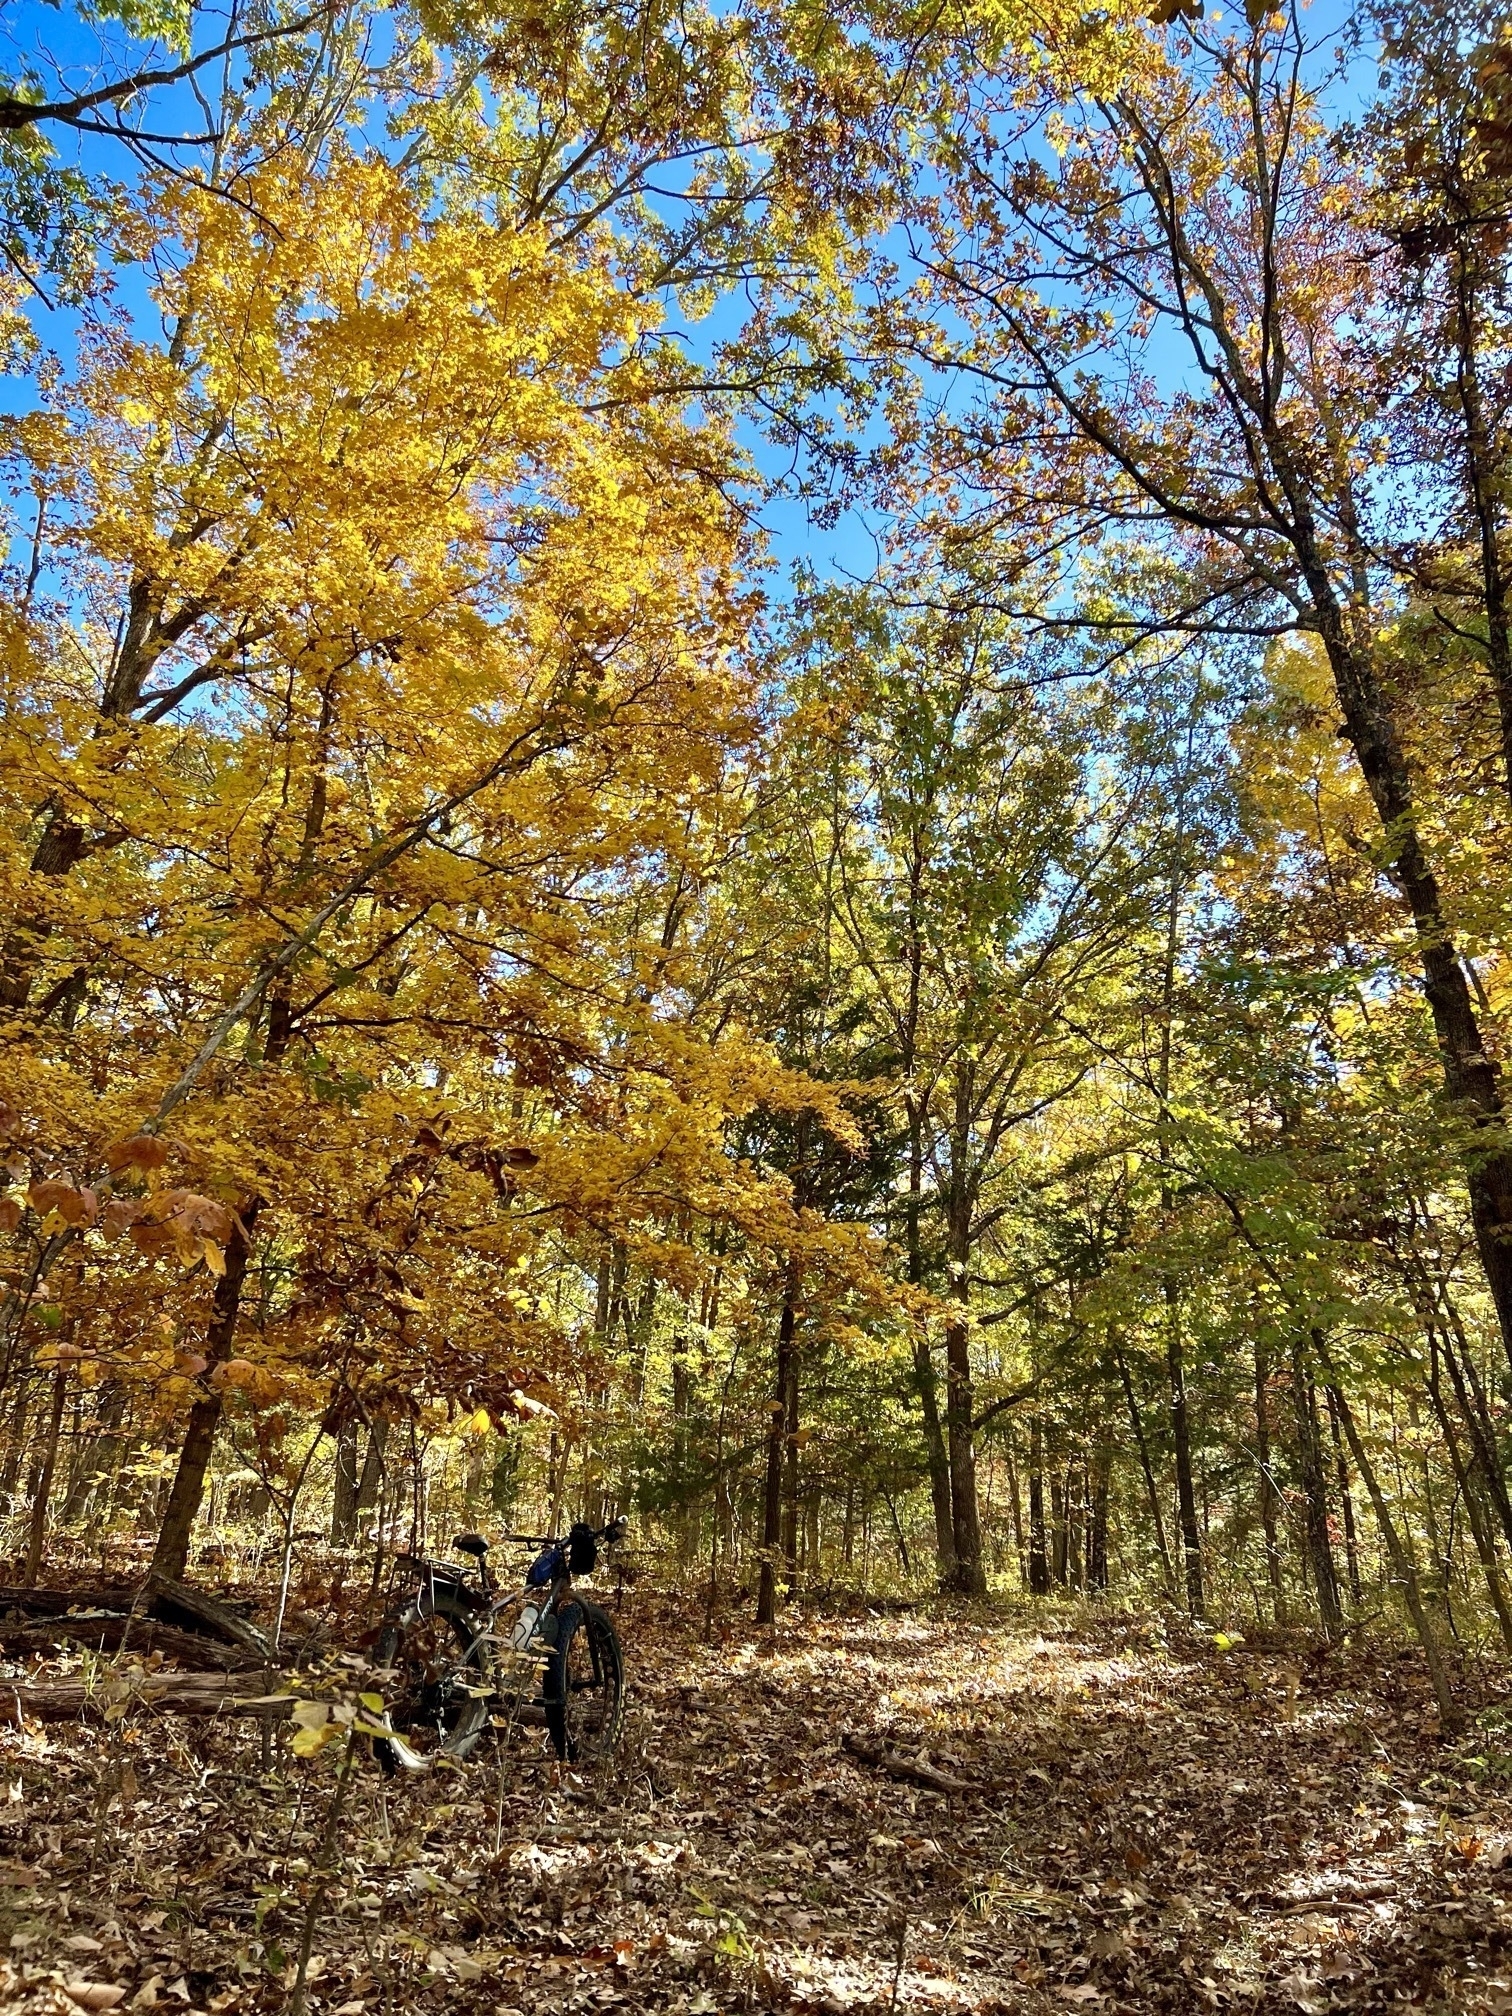 A fat tire bike leaves against a tree near a leaf-covered trail under a canopy of bright yellow and green leaves against a bright blue sky.